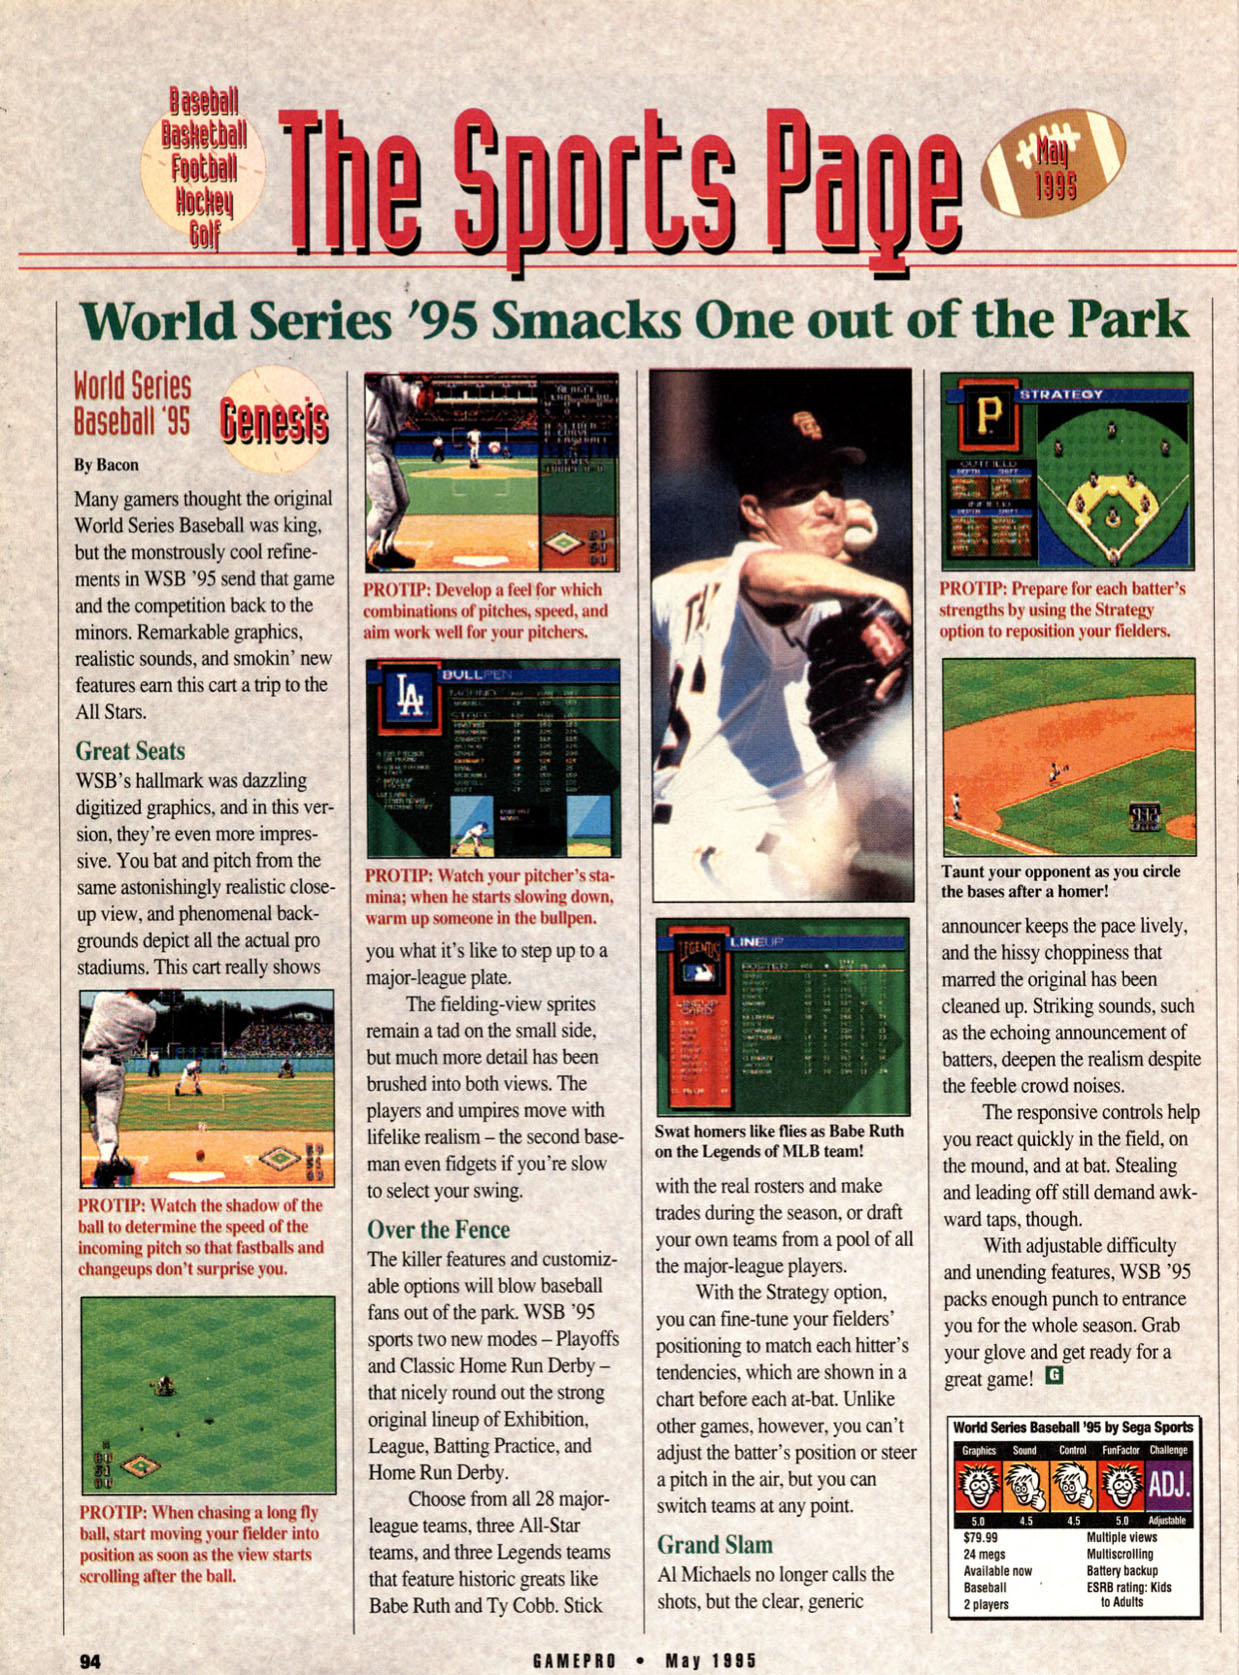 World Series '95 Smacks One out of the Park, GamePro May 1995 page 94